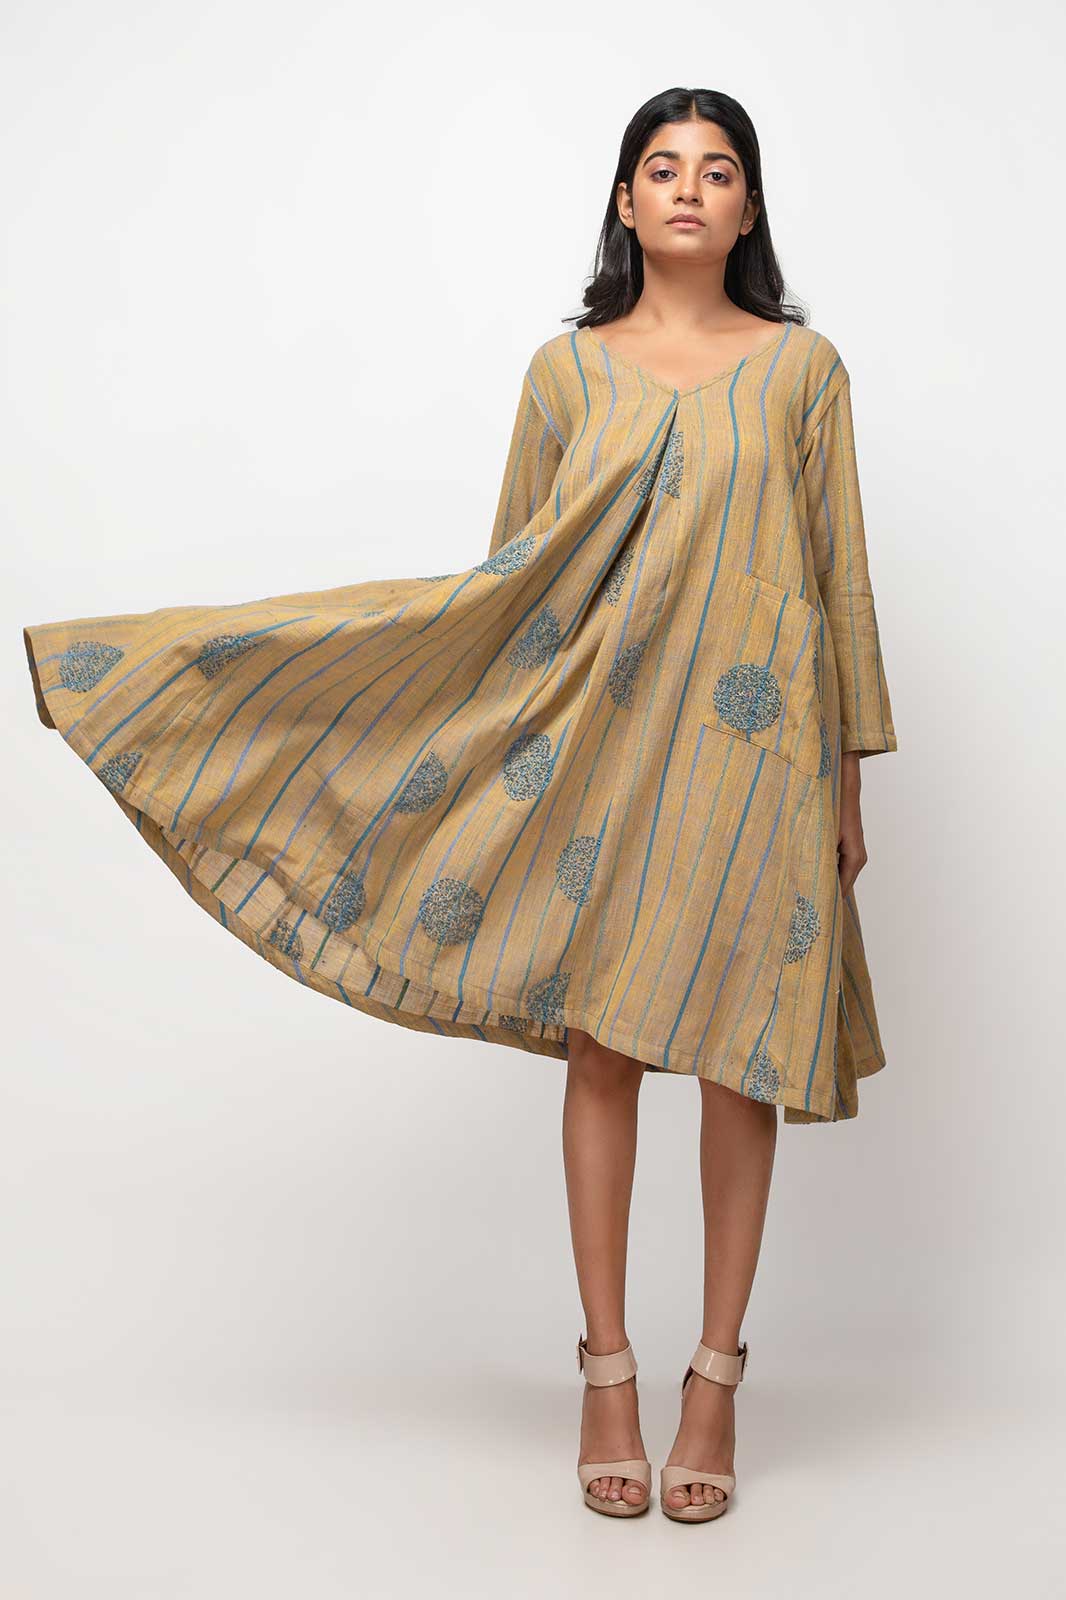 ladies cotton clothing , organic cotton handmade dress, full length cotton a line dress, long women dresses, women's long sleeve dresses, handmade cotton dress, handwoven cotton dress, handmade cotton linen dress,  handwoven printed dresses, knee length dresses formal, , knee length dresses plus size, knee length dress casual, ladies cotton clothing, Indian designer clothing brand, sustainable clothing, cotton dress with sleeves, ladies summer dress, handwoven printed dresses, cotton dress readymade, sepia stories, ladies off shoulder dress, sleeveless dress, mangalgiri cotton dress, mangalgiri cotton, cotton dress, women cotton dress, designer cotton dress, summer dresses online, latest summer collection